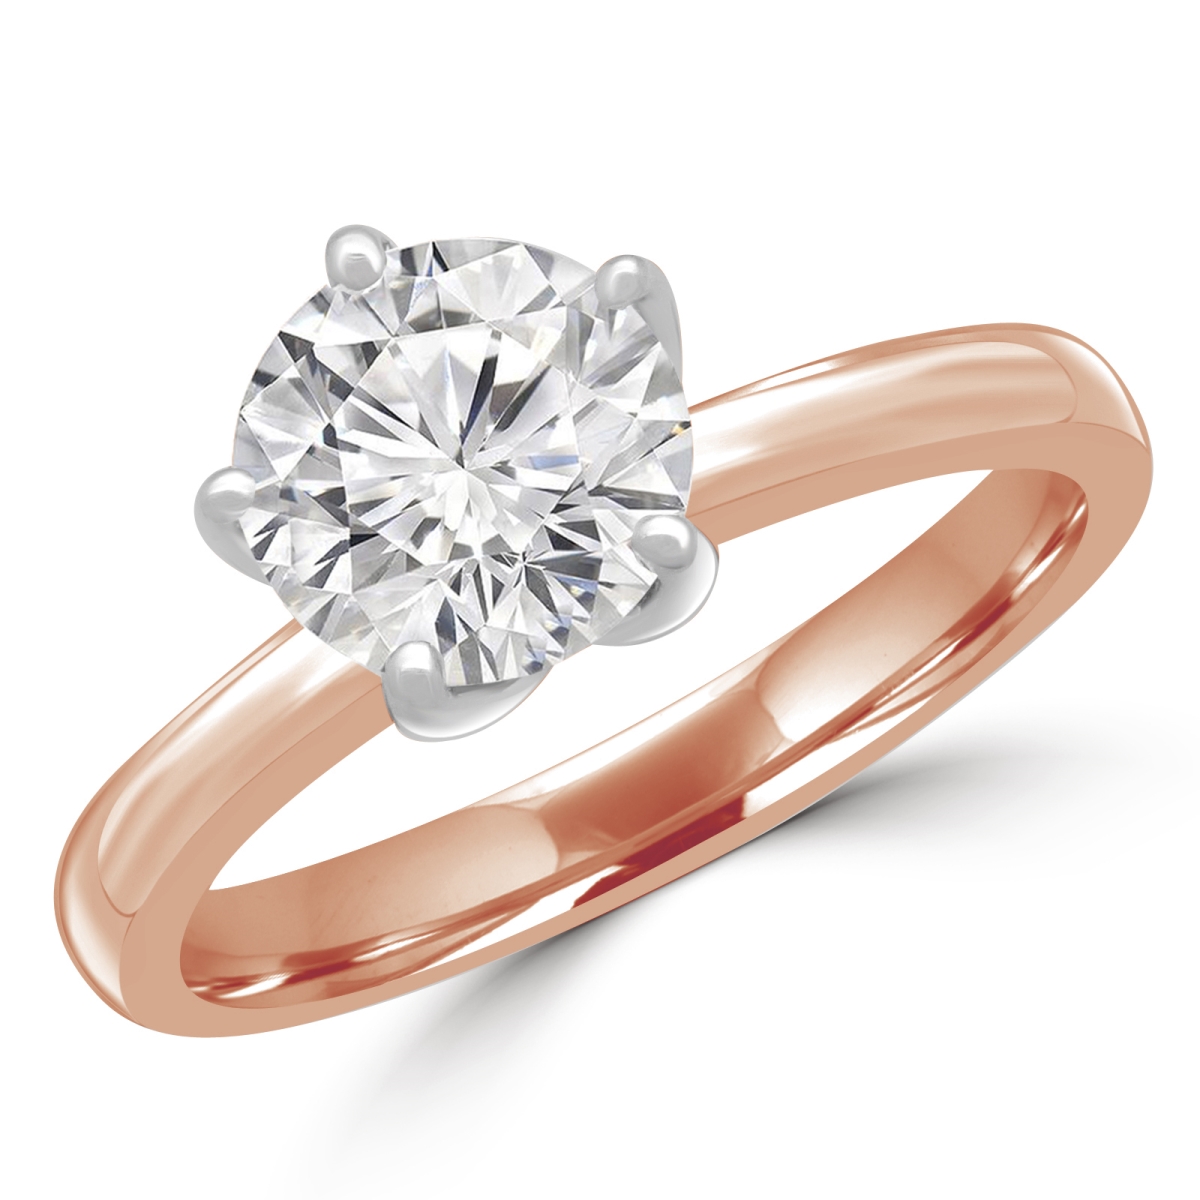 MD180085-7.25 0.6 CT Round Diamond Five-Prong Solitaire Engagement Ring in 14K Rose Gold - Size 7.25